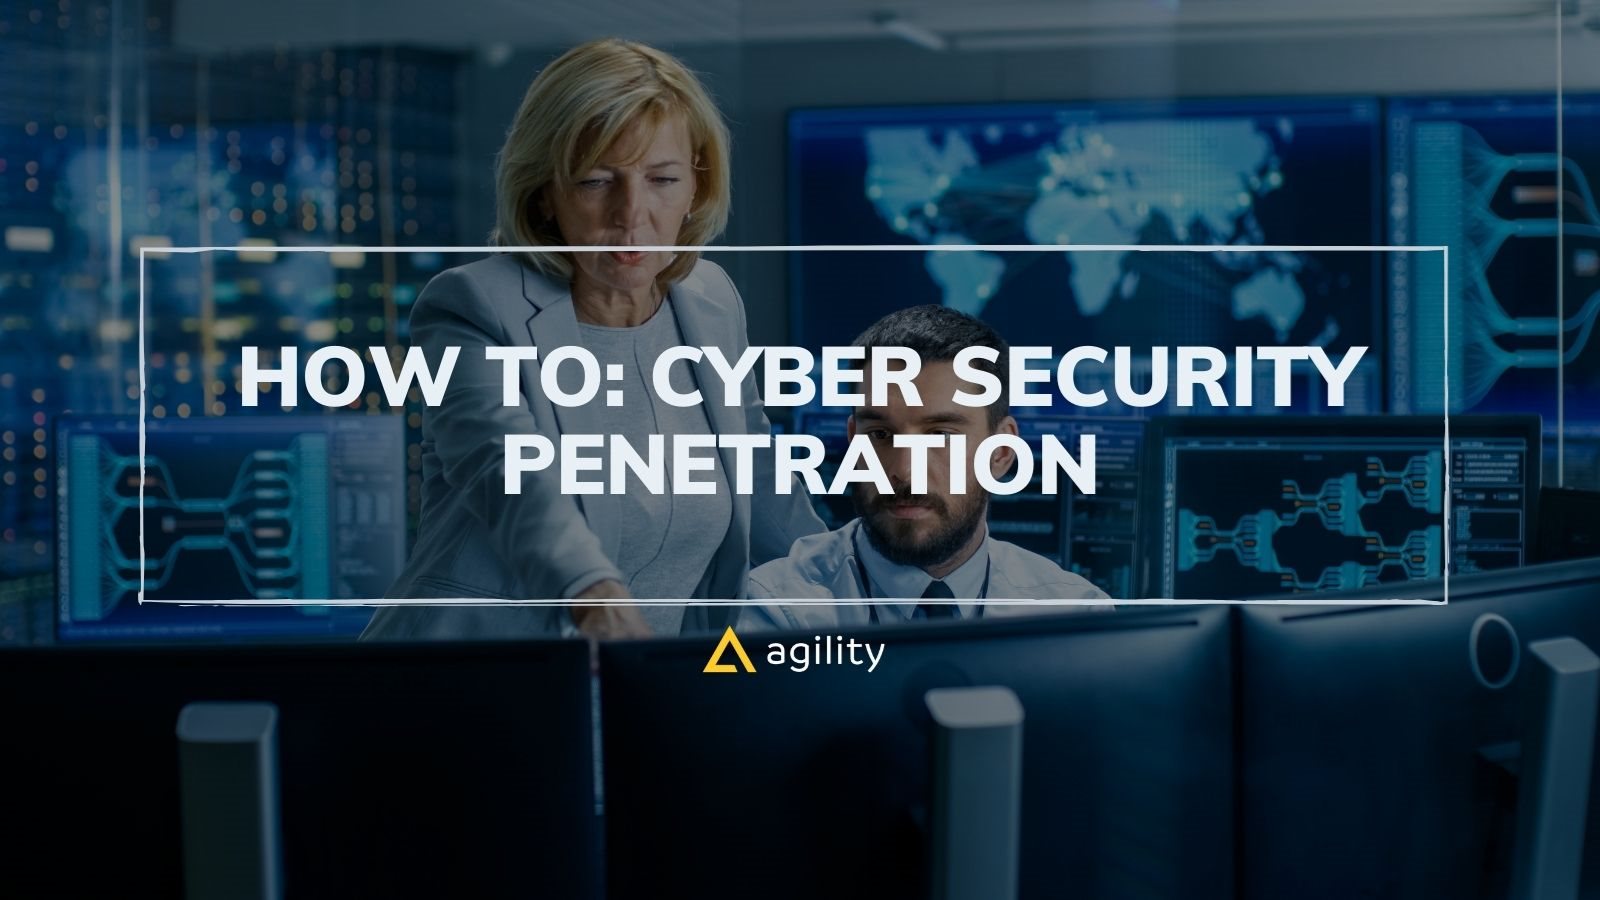 How To: Cyber Security Penetration